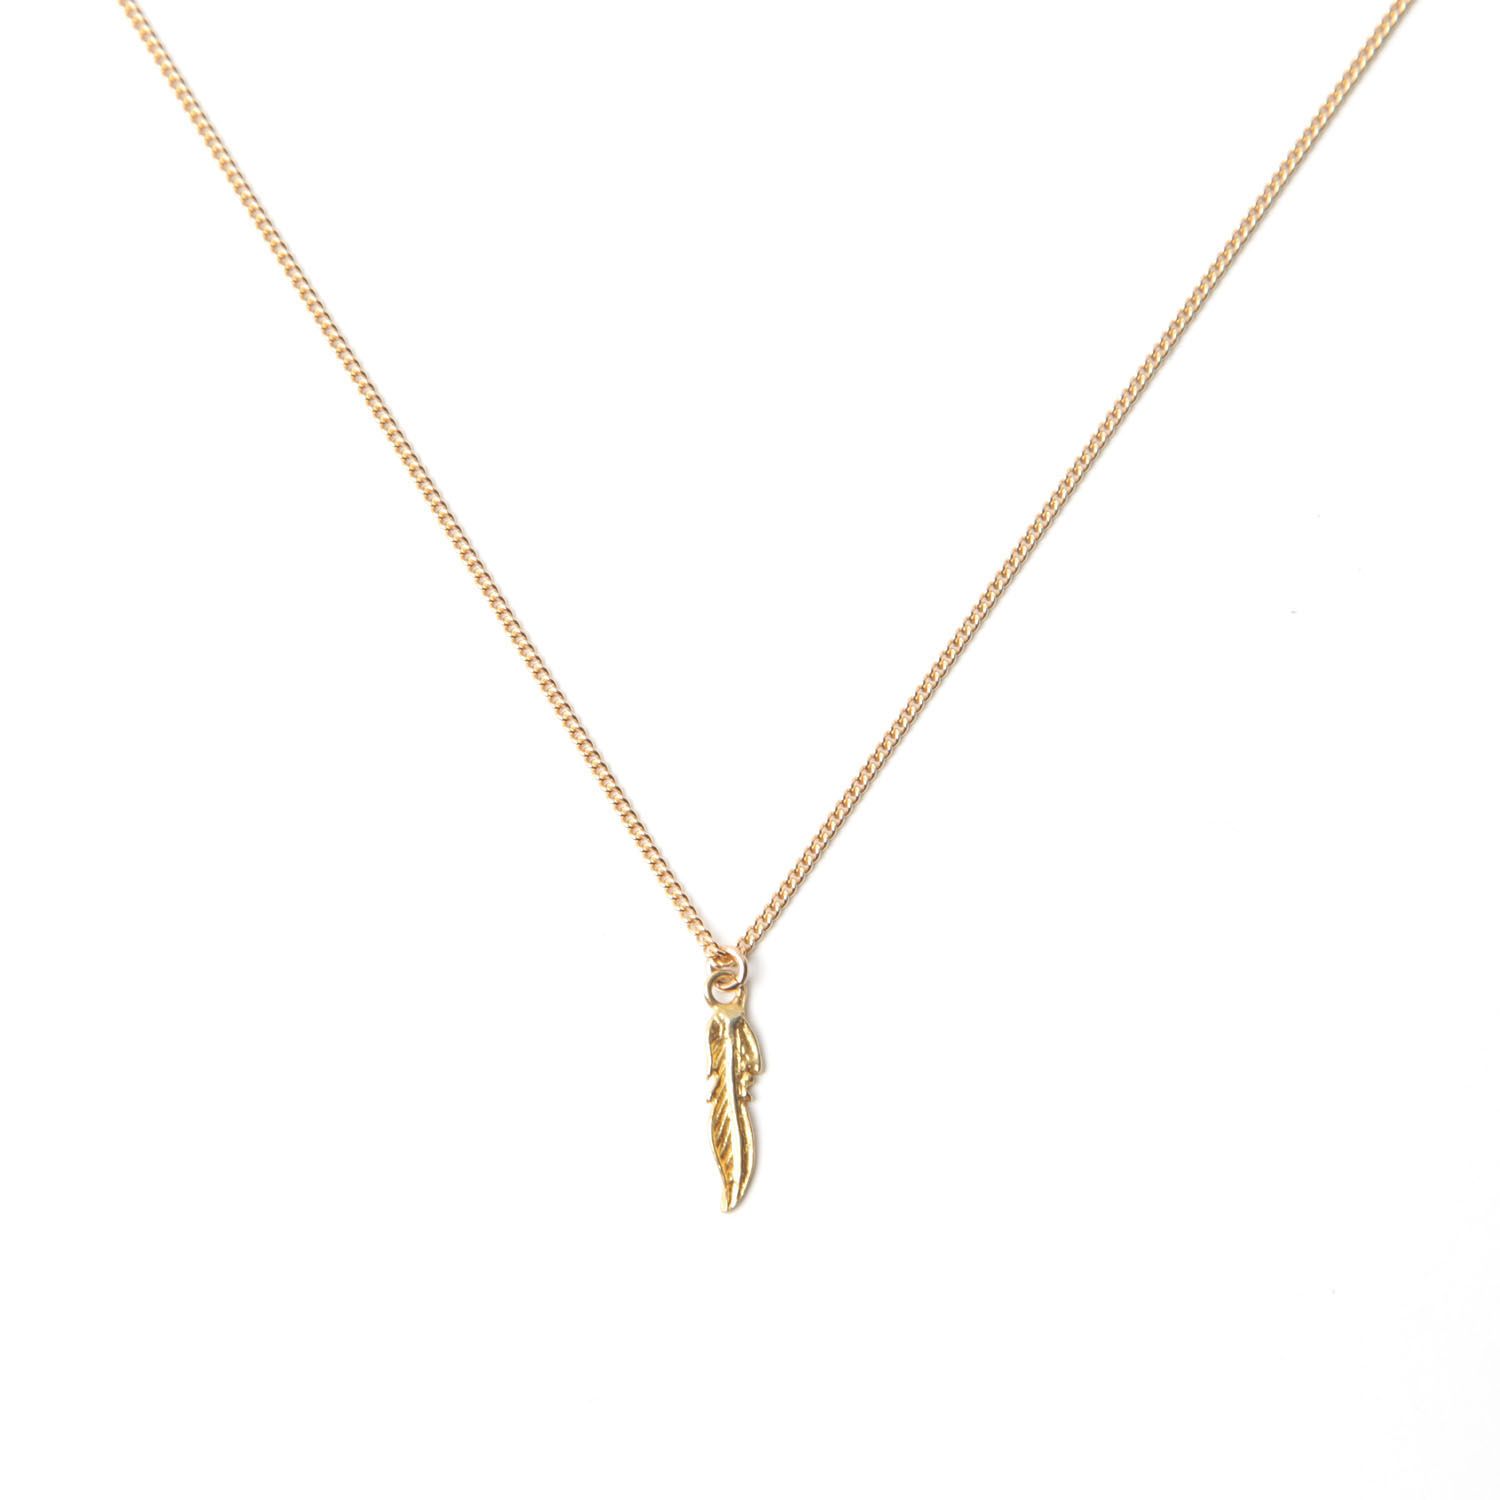 Gold Single Feather Pendant Necklace Throughout 2020 Single Feather Pendant Necklaces (View 1 of 25)